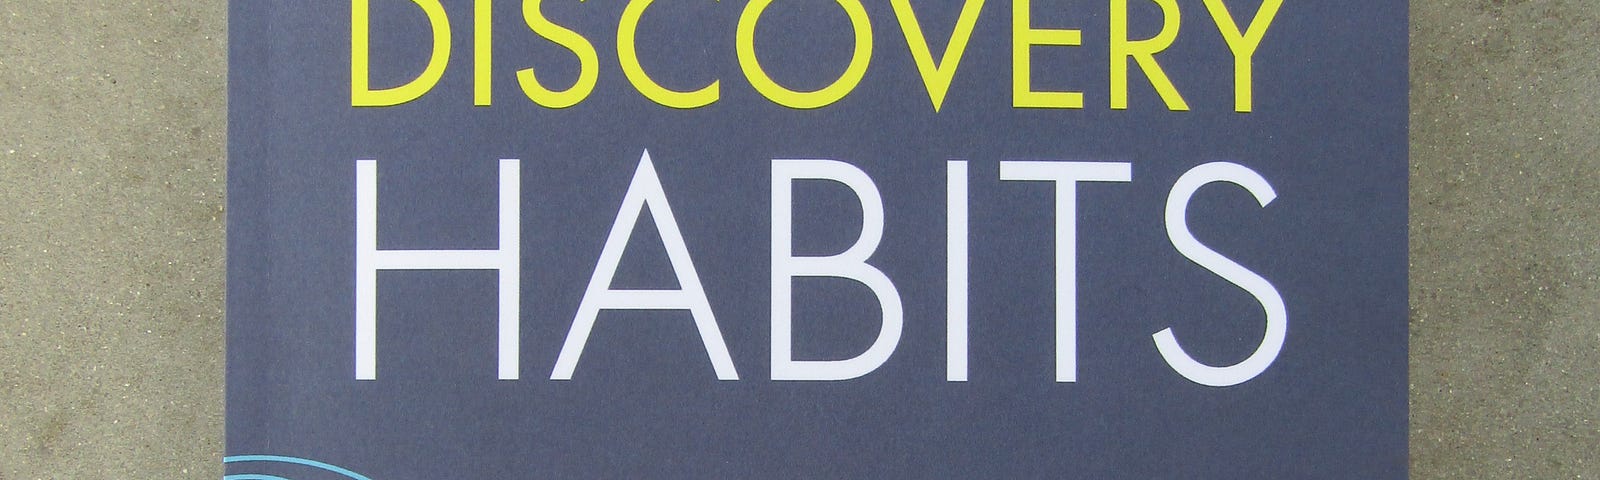 Continuous Discovery Habits by Teresa Torres